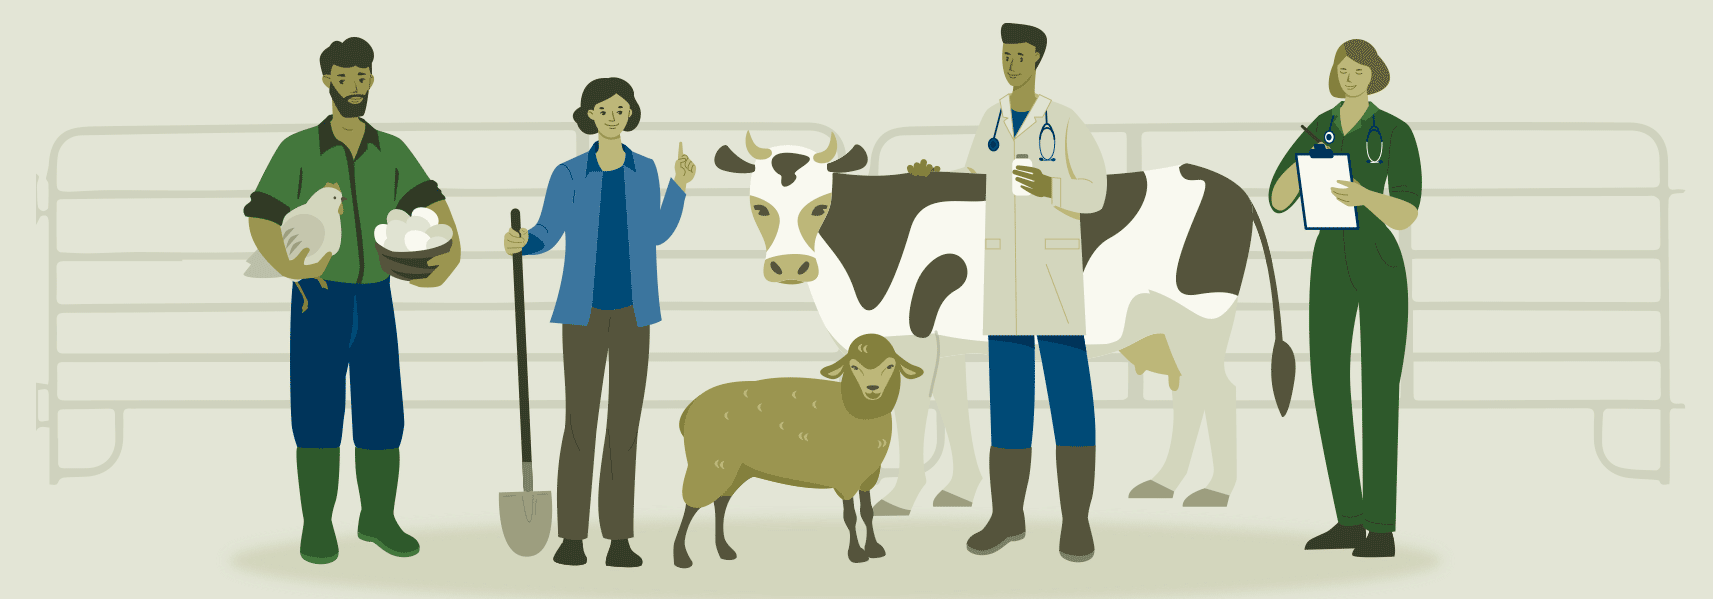 ilustration of producers, livestock, and veterinarians